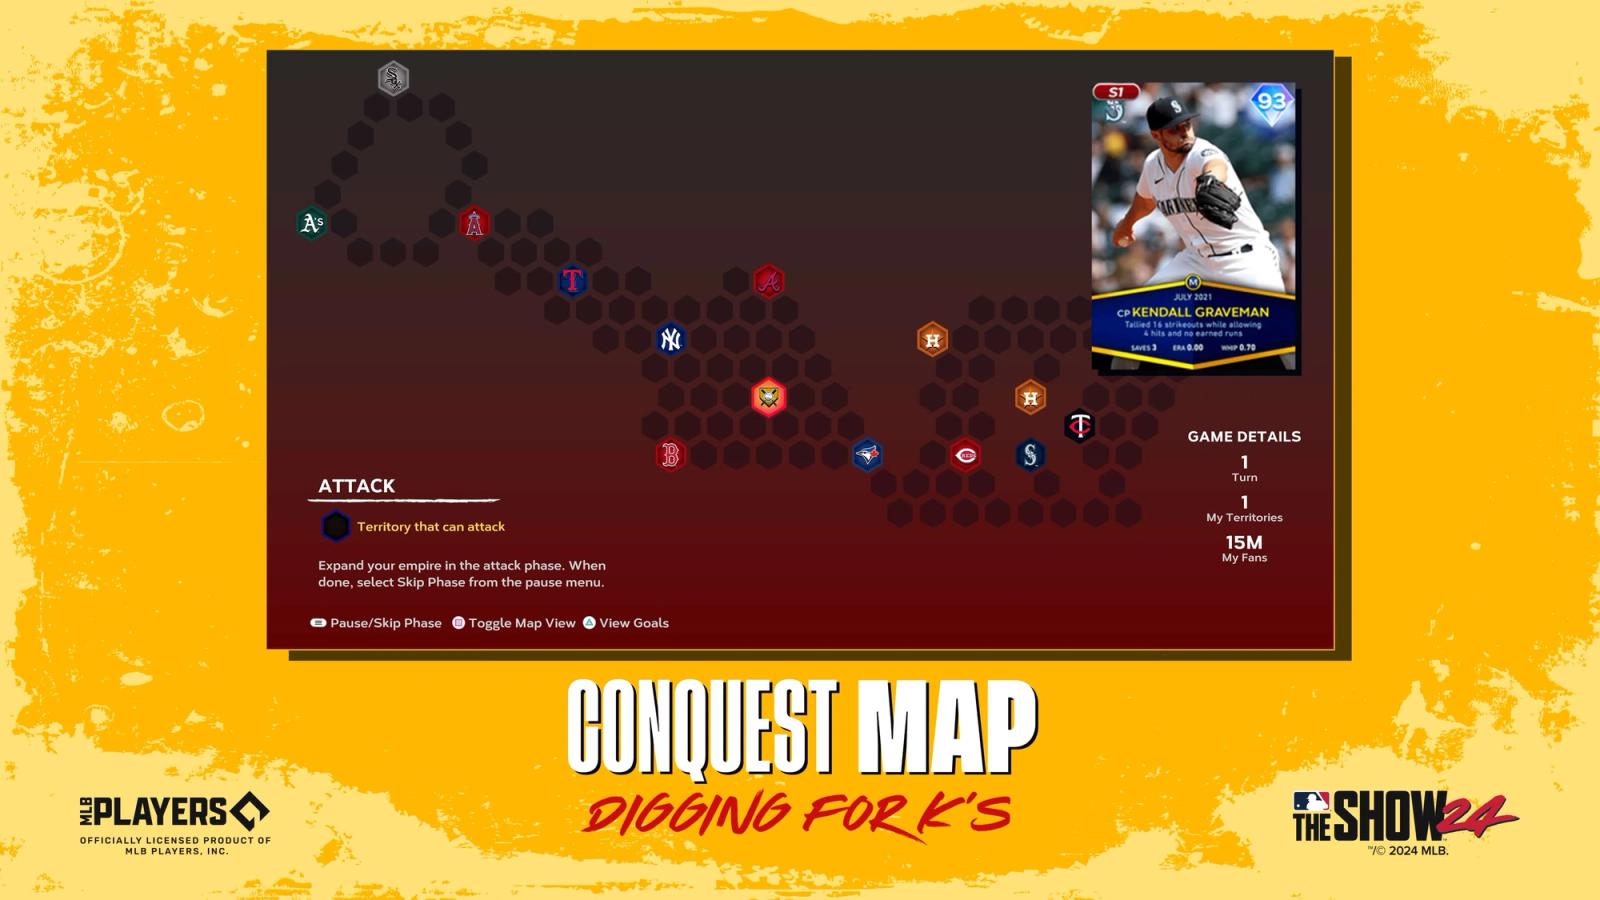 MLB The Show 24 Digging For K's Conquest Map